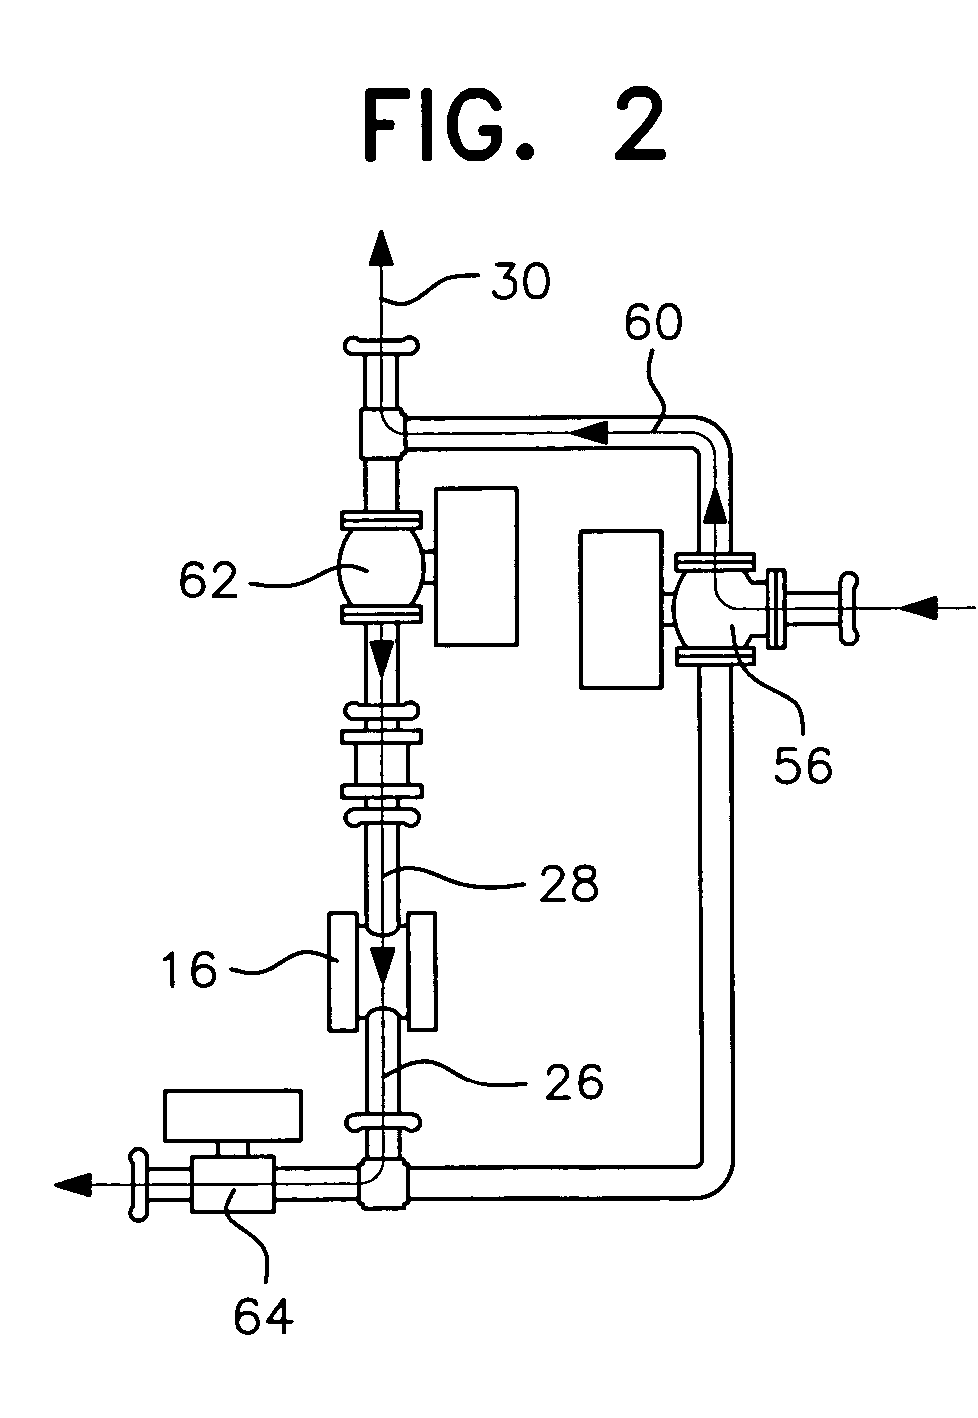 Method and apparatus for making crystalline pet pellets